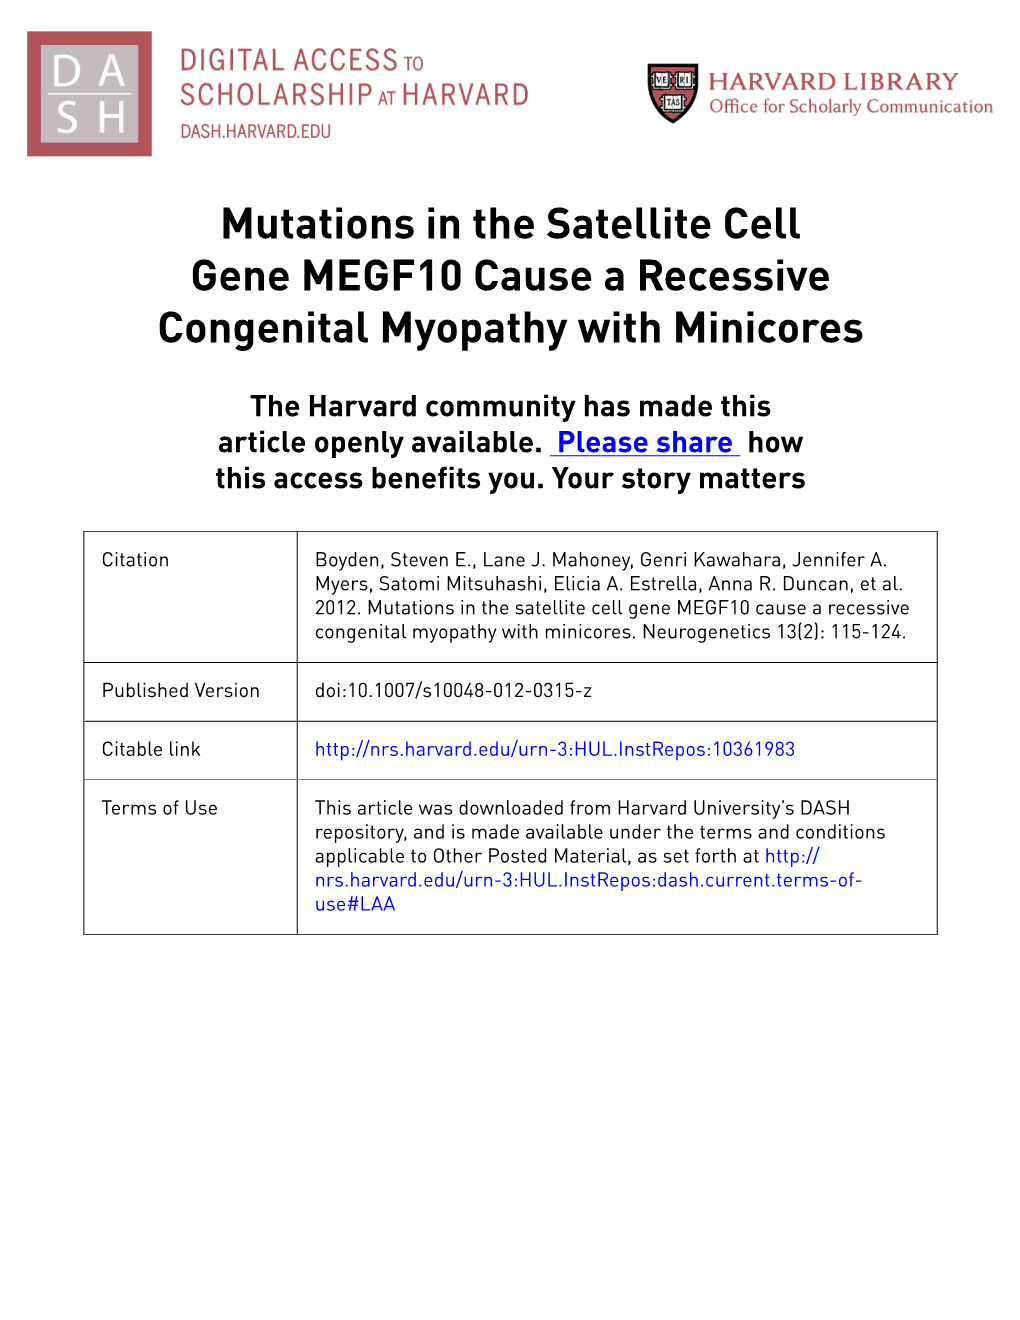 Mutations in the Satellite Cell Gene MEGF10 Cause a Recessive Congenital Myopathy with Minicores